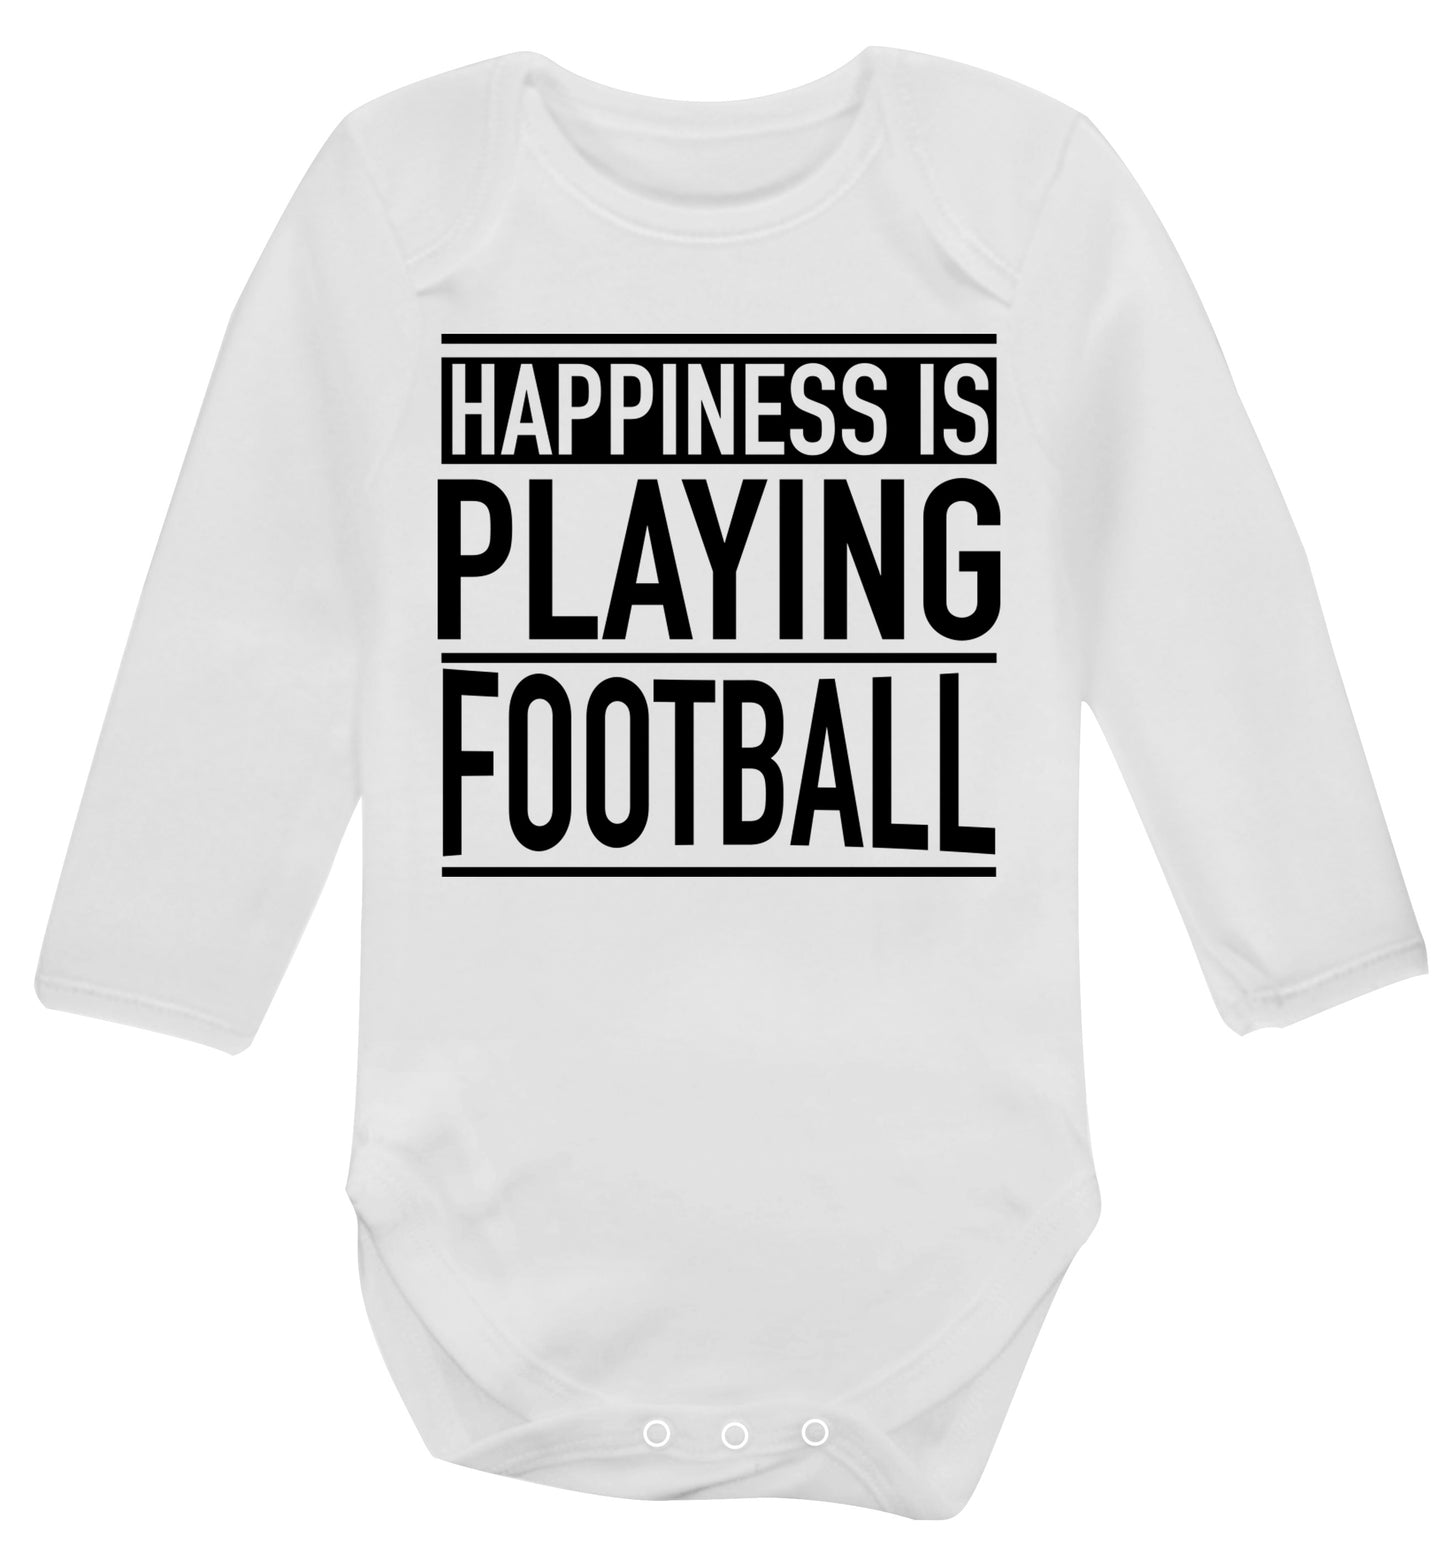 Happiness is playing football Baby Vest long sleeved white 6-12 months